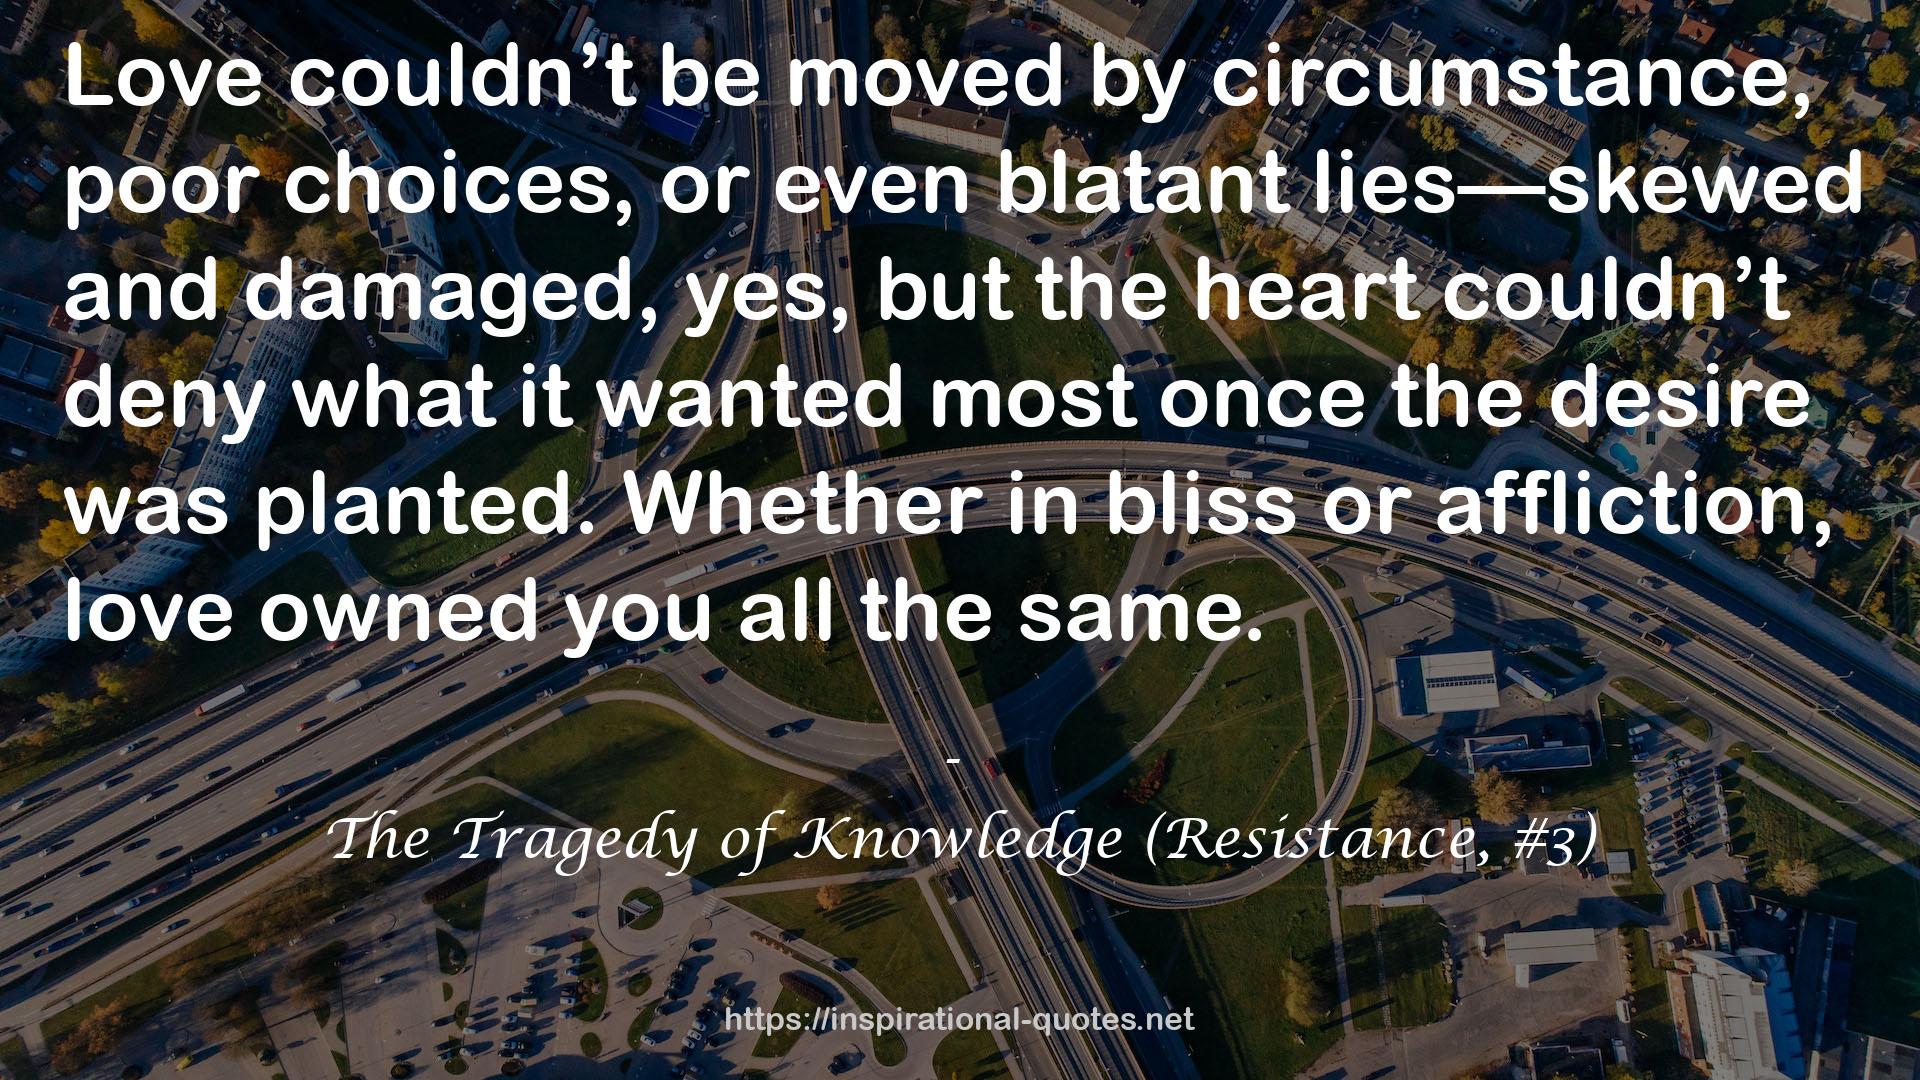 The Tragedy of Knowledge (Resistance, #3) QUOTES